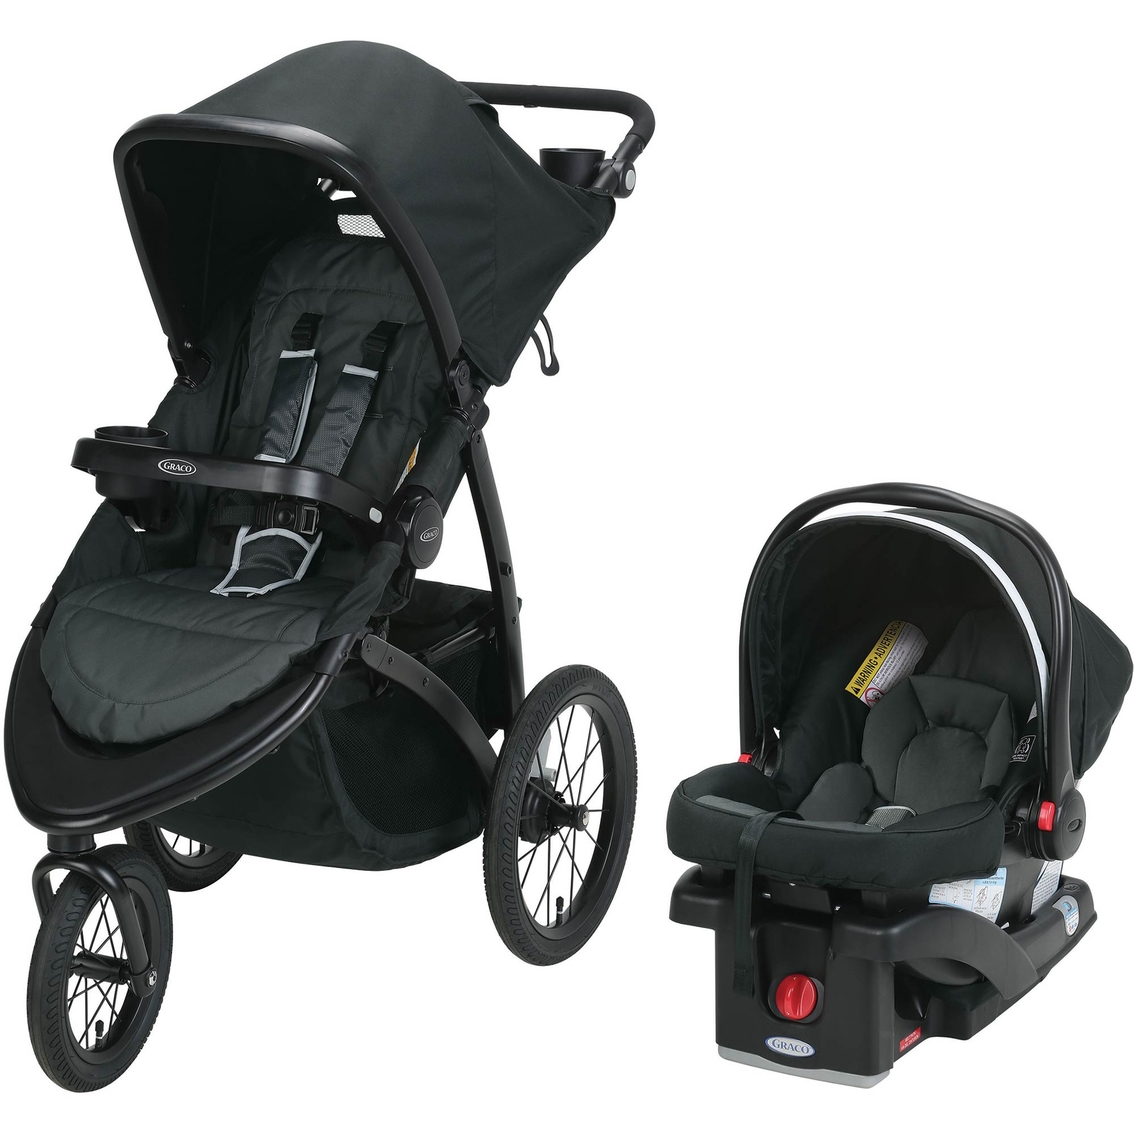 Graco Baby RoadMaster Jogger Travel System Jogging Stroller with Infant Car Seat 